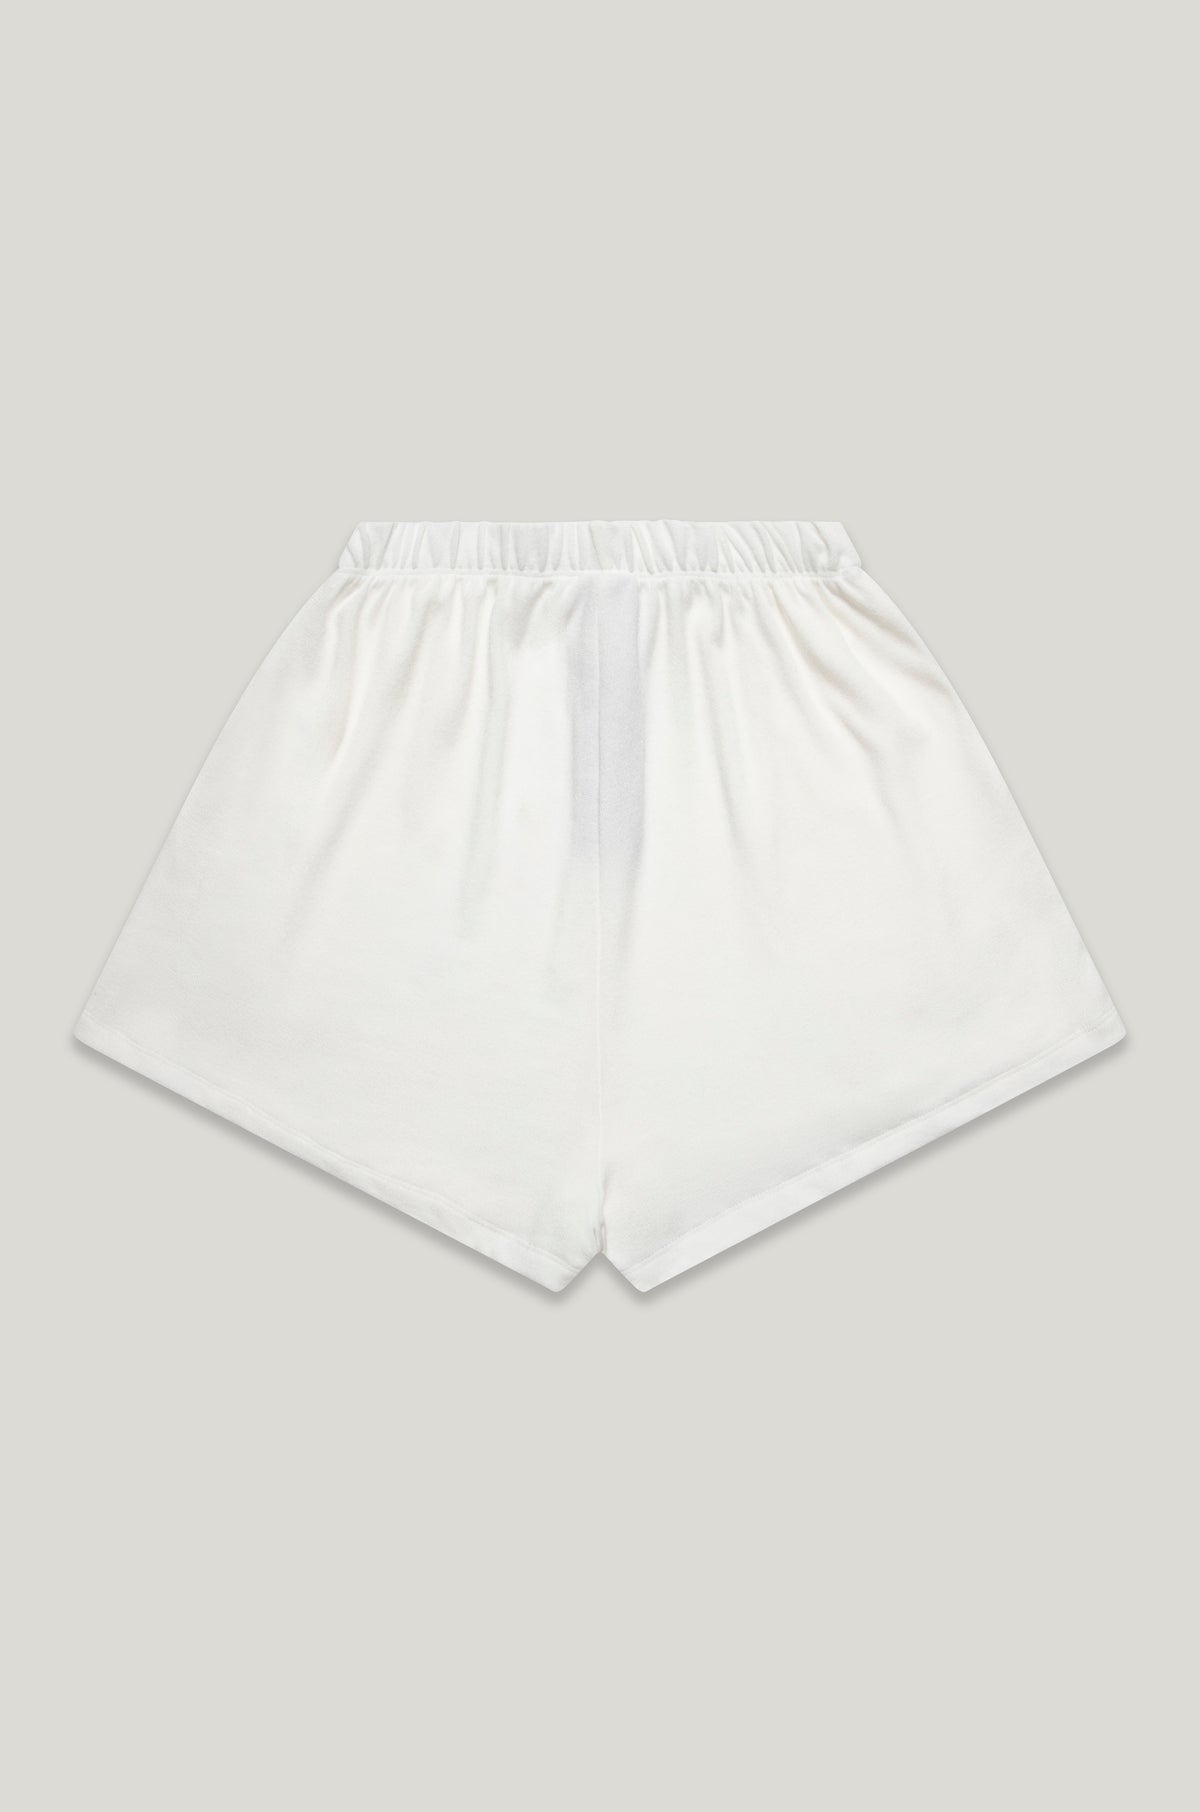 Texas State  Ace Shorts